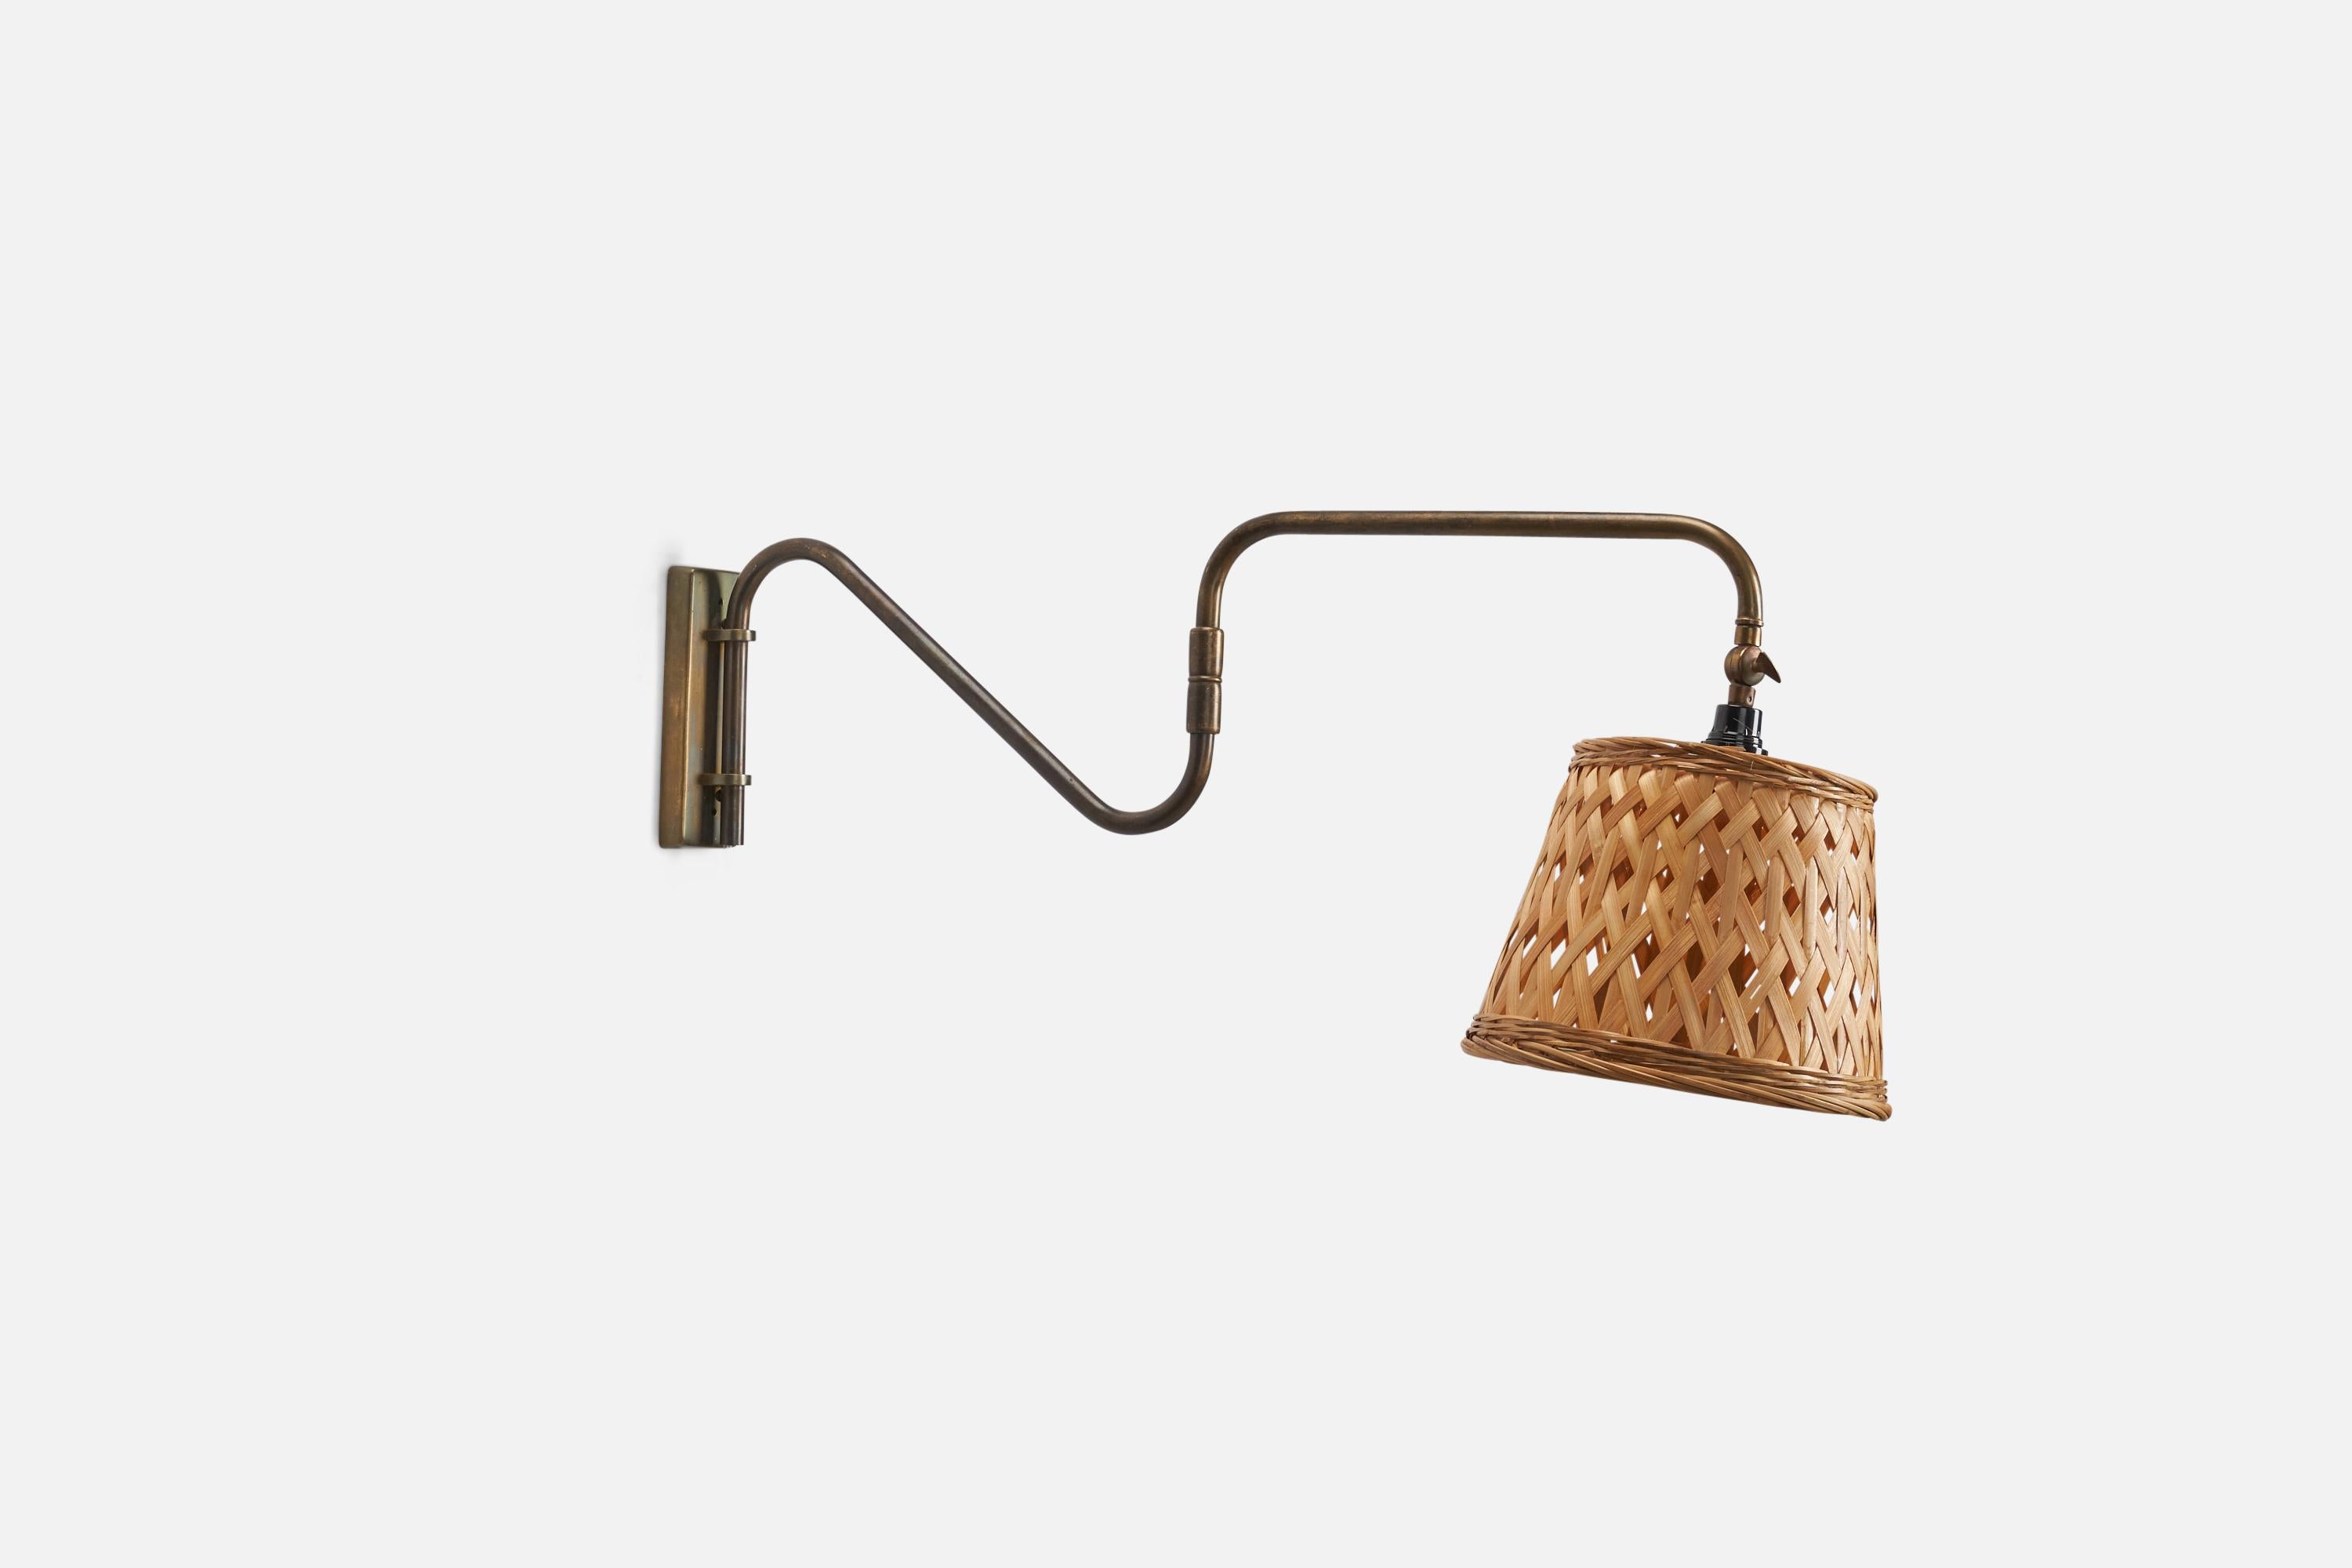 A brass and rattan designed and produced by a Danish Designer, Denmark, 1940s.

Dimensions variable, measurements listed are of sconce in its maximum extended position. 

Dimensions of Back Plate (inches) : 5.9 x 2 x 0.6 (Height x Width x